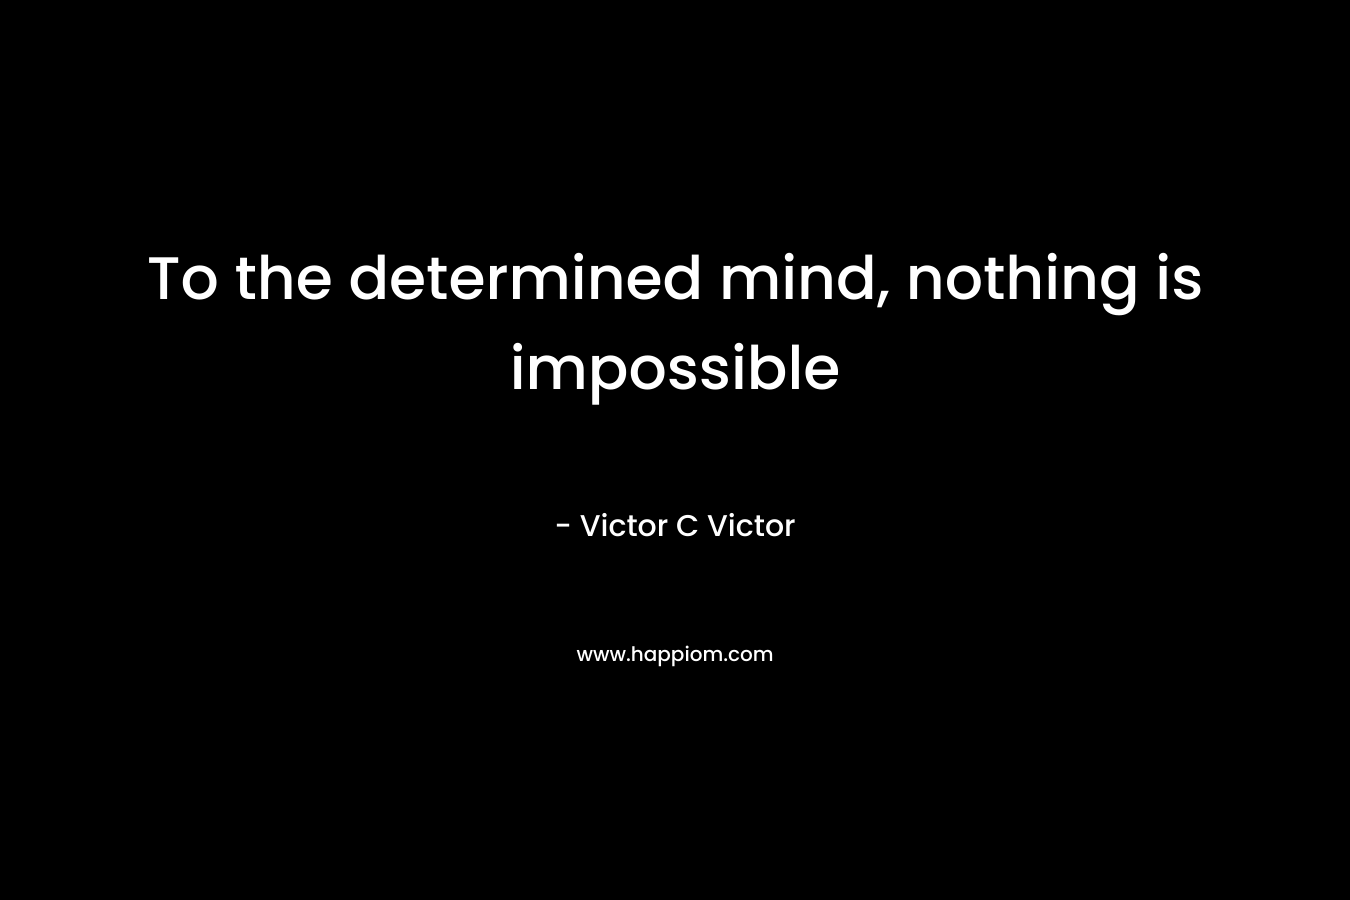 To the determined mind, nothing is impossible